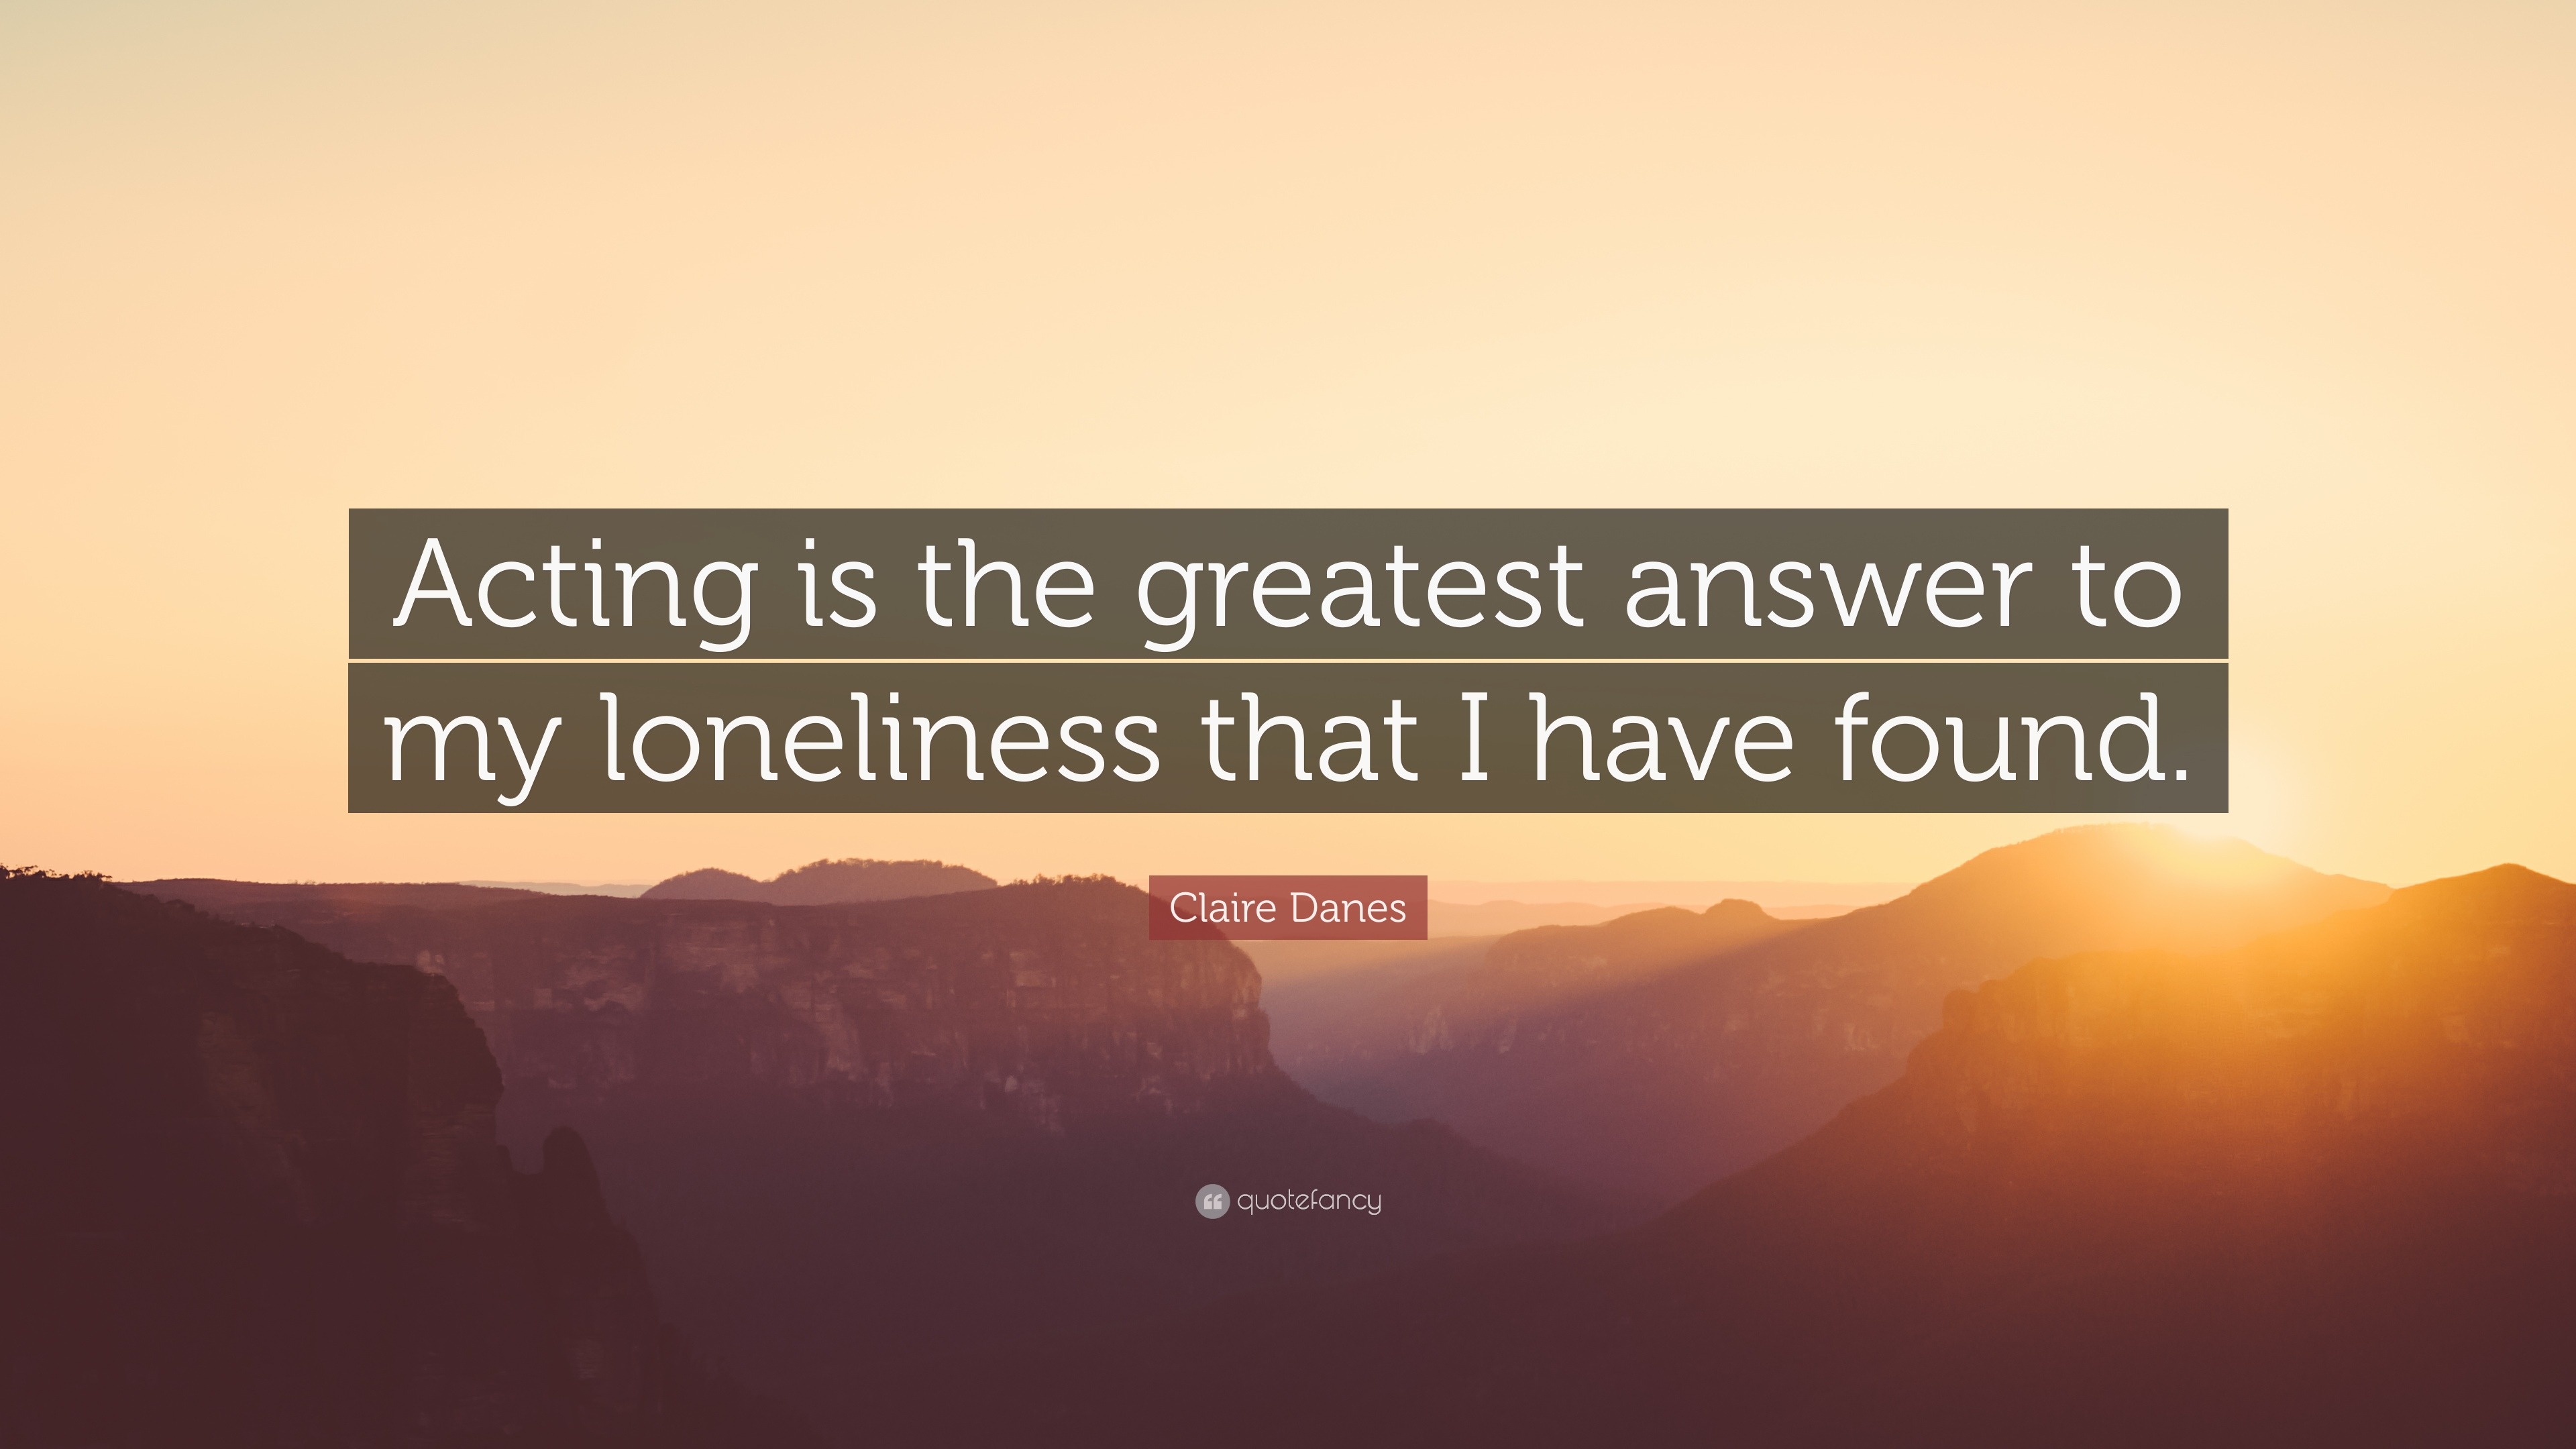 609614 Claire Danes Quote Acting Is The Greatest Answer To My Loneliness 